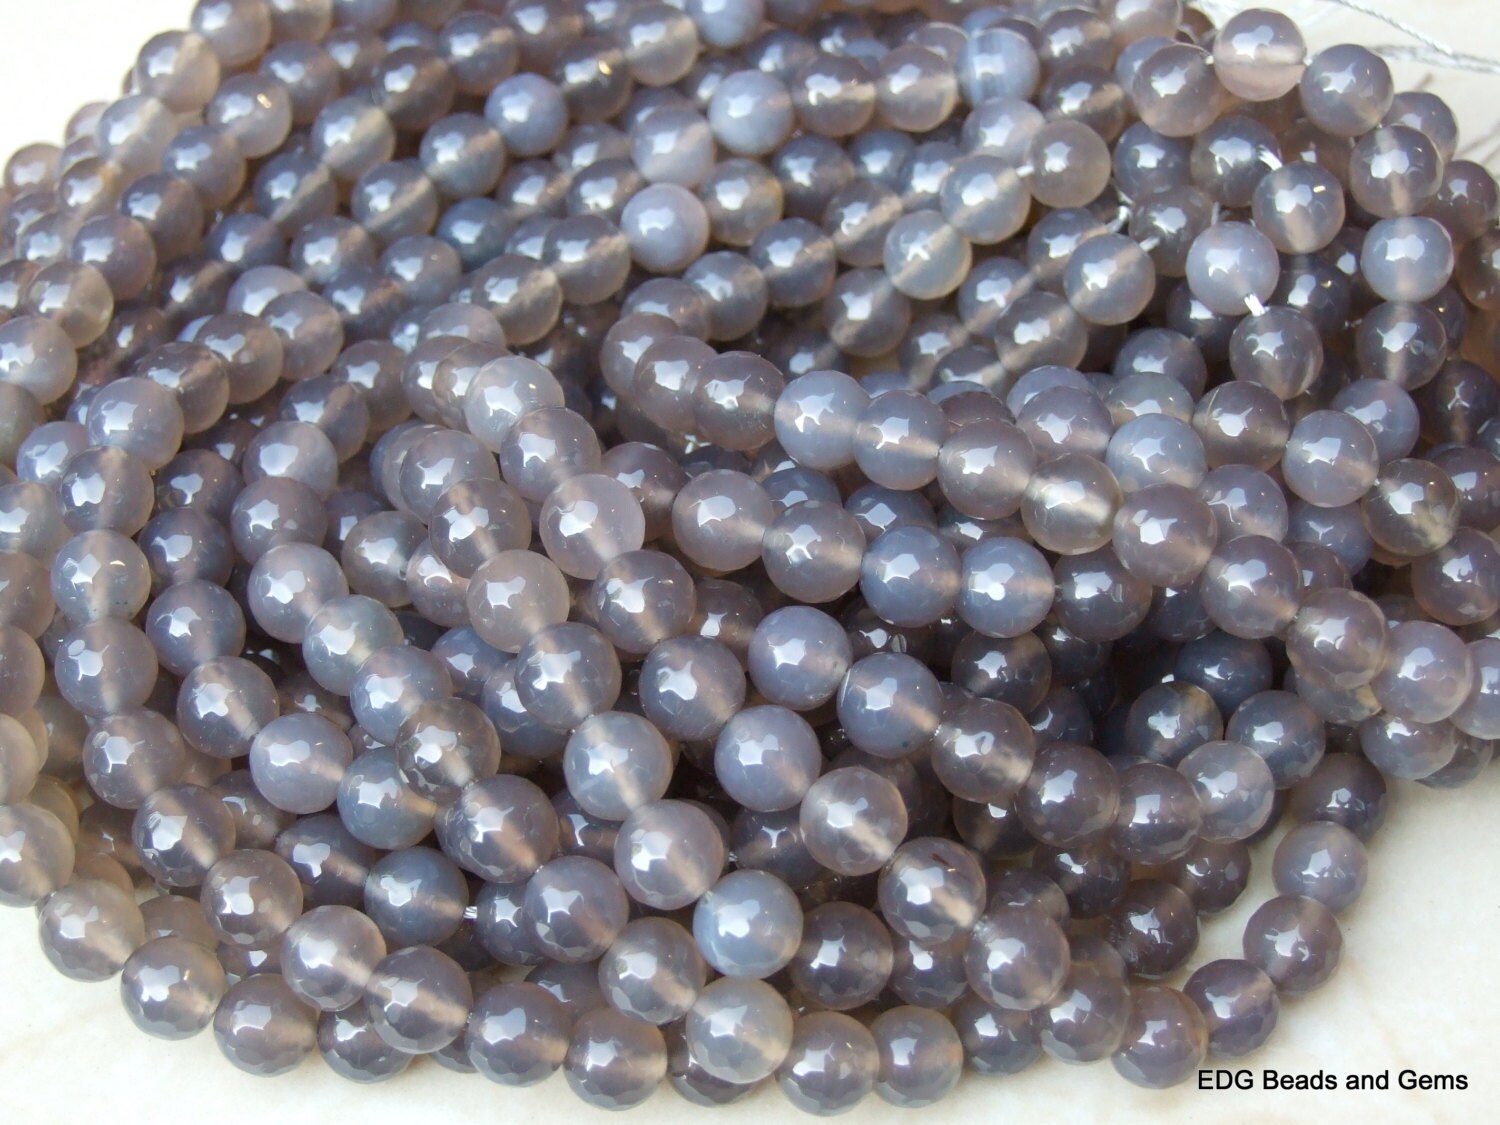 Gray Faceted Agate Beads - 10mm - Agate Faceted Bead - Multifaceted - Gemstone Beads - Jewelry Beads  15 inch Strand